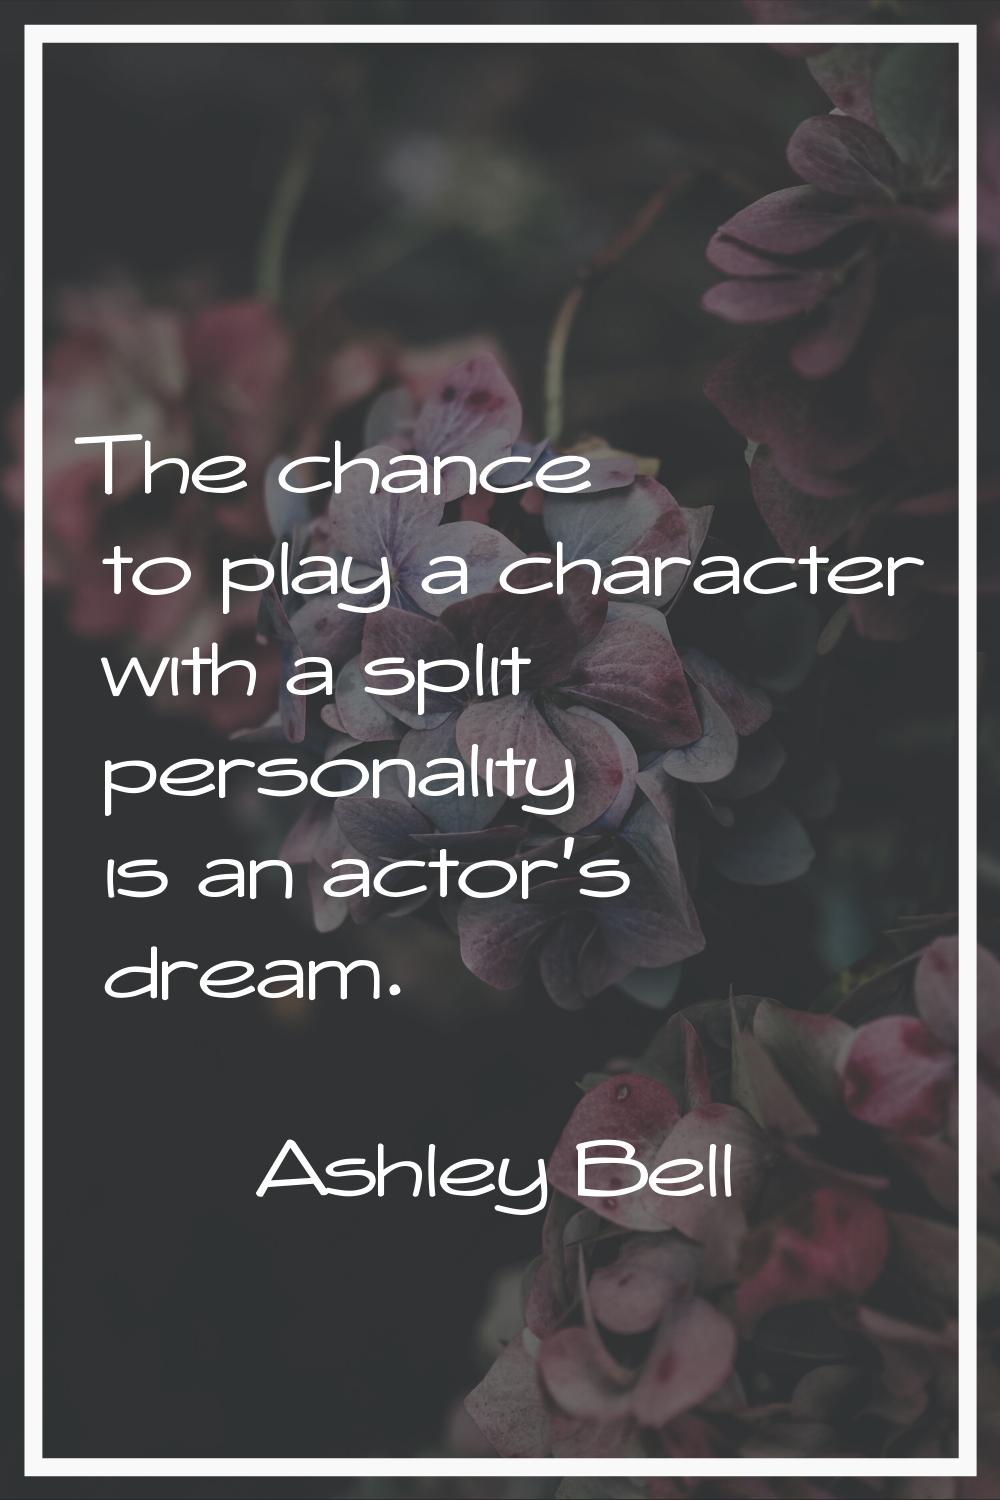 The chance to play a character with a split personality is an actor's dream.